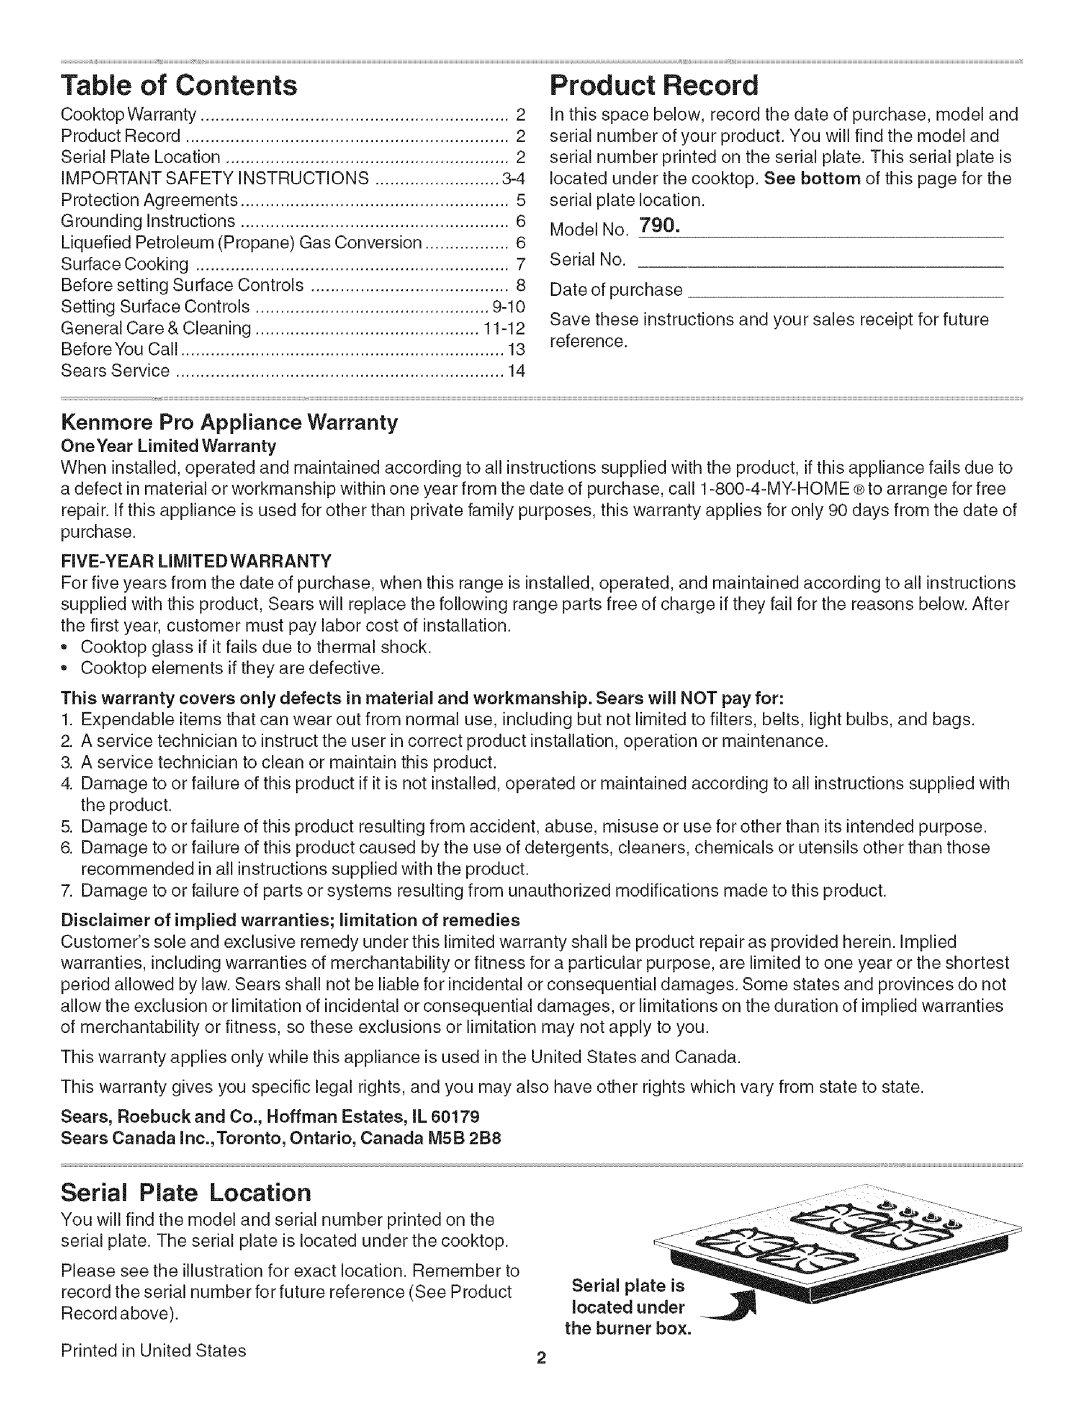 Kenmore 790.3101 manual of Contents, Product, Record, Serial Plate Location, Kenmore Pro Appliance Warranty 